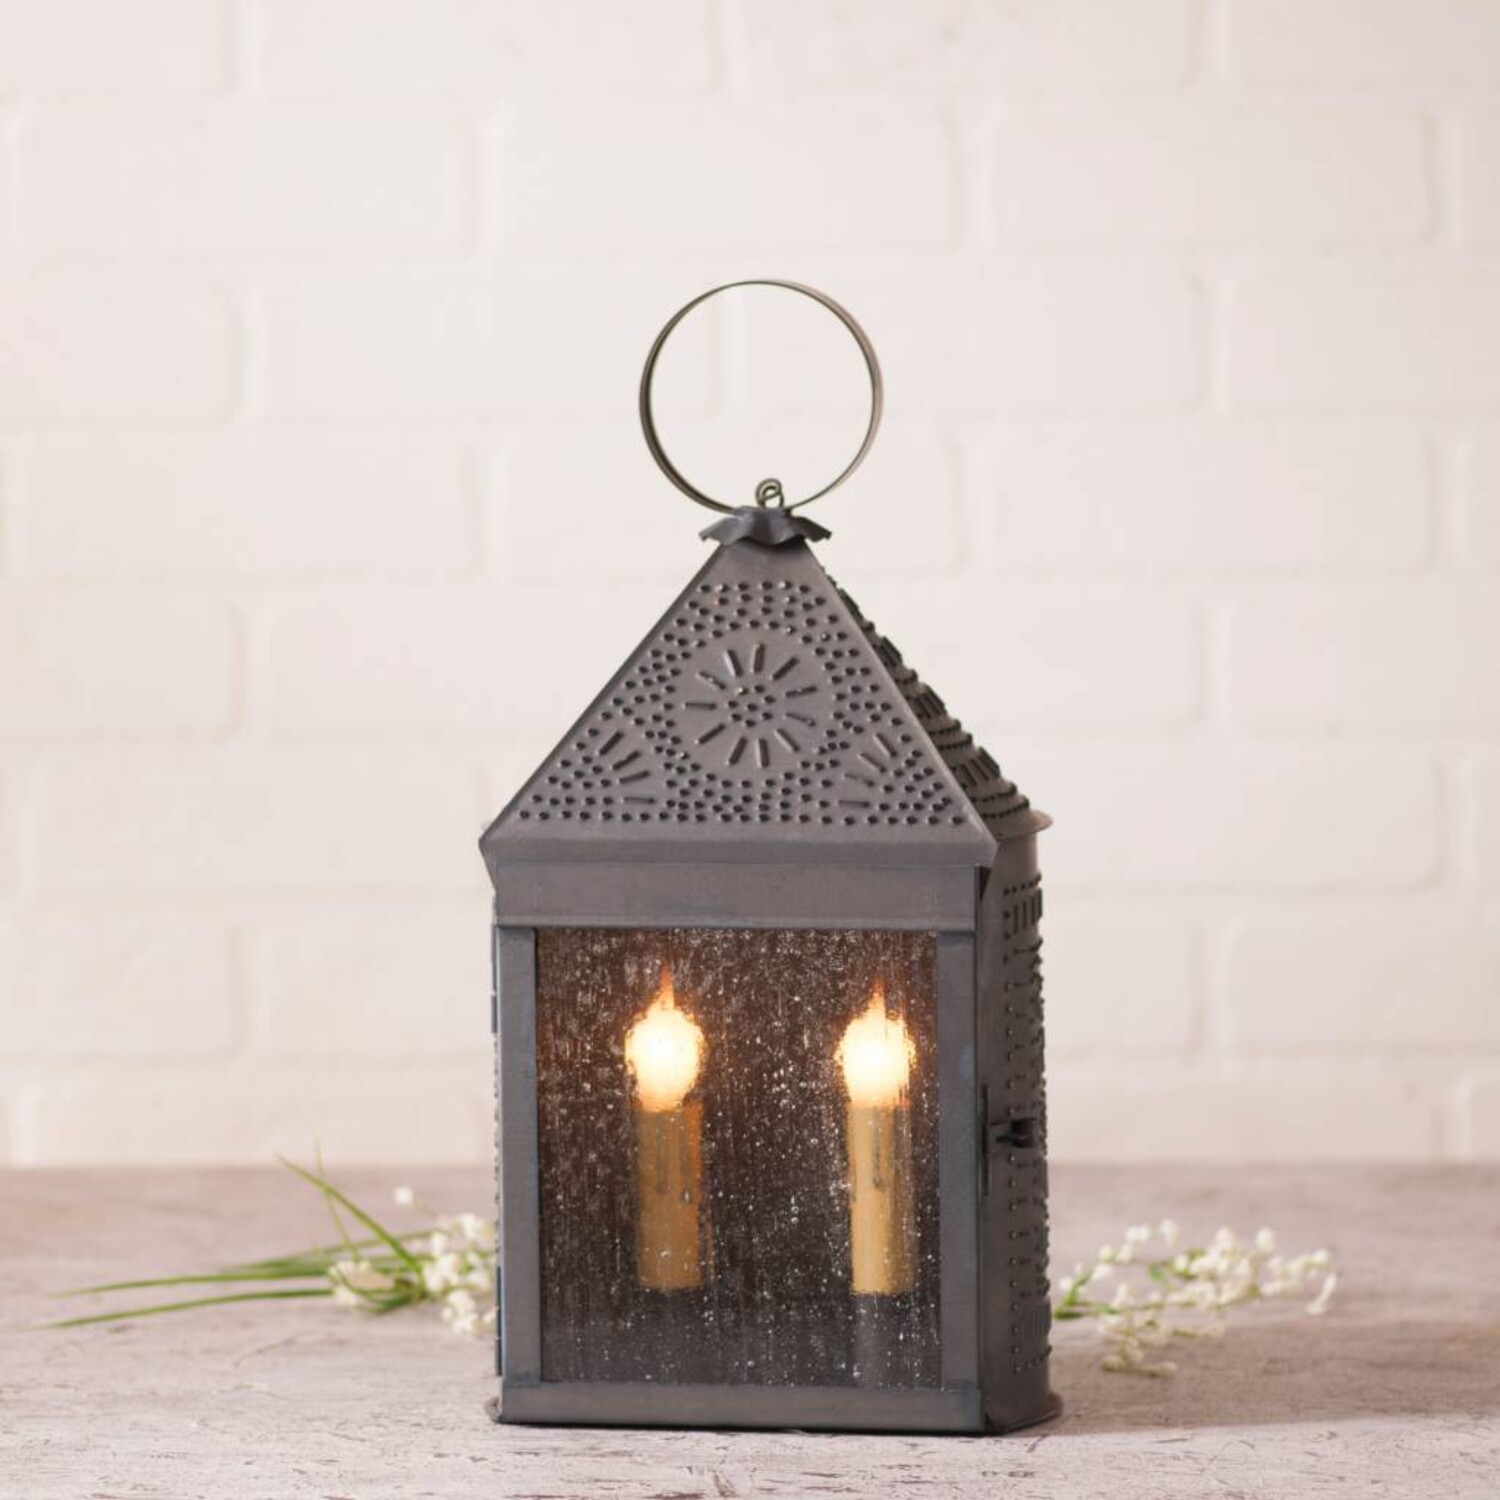 Rustic Candle Holder Sconce, Wall Candle Holder, Blacksmith Forged Steel,  Primitive Early Candle Lighting, Colonial Lighting 